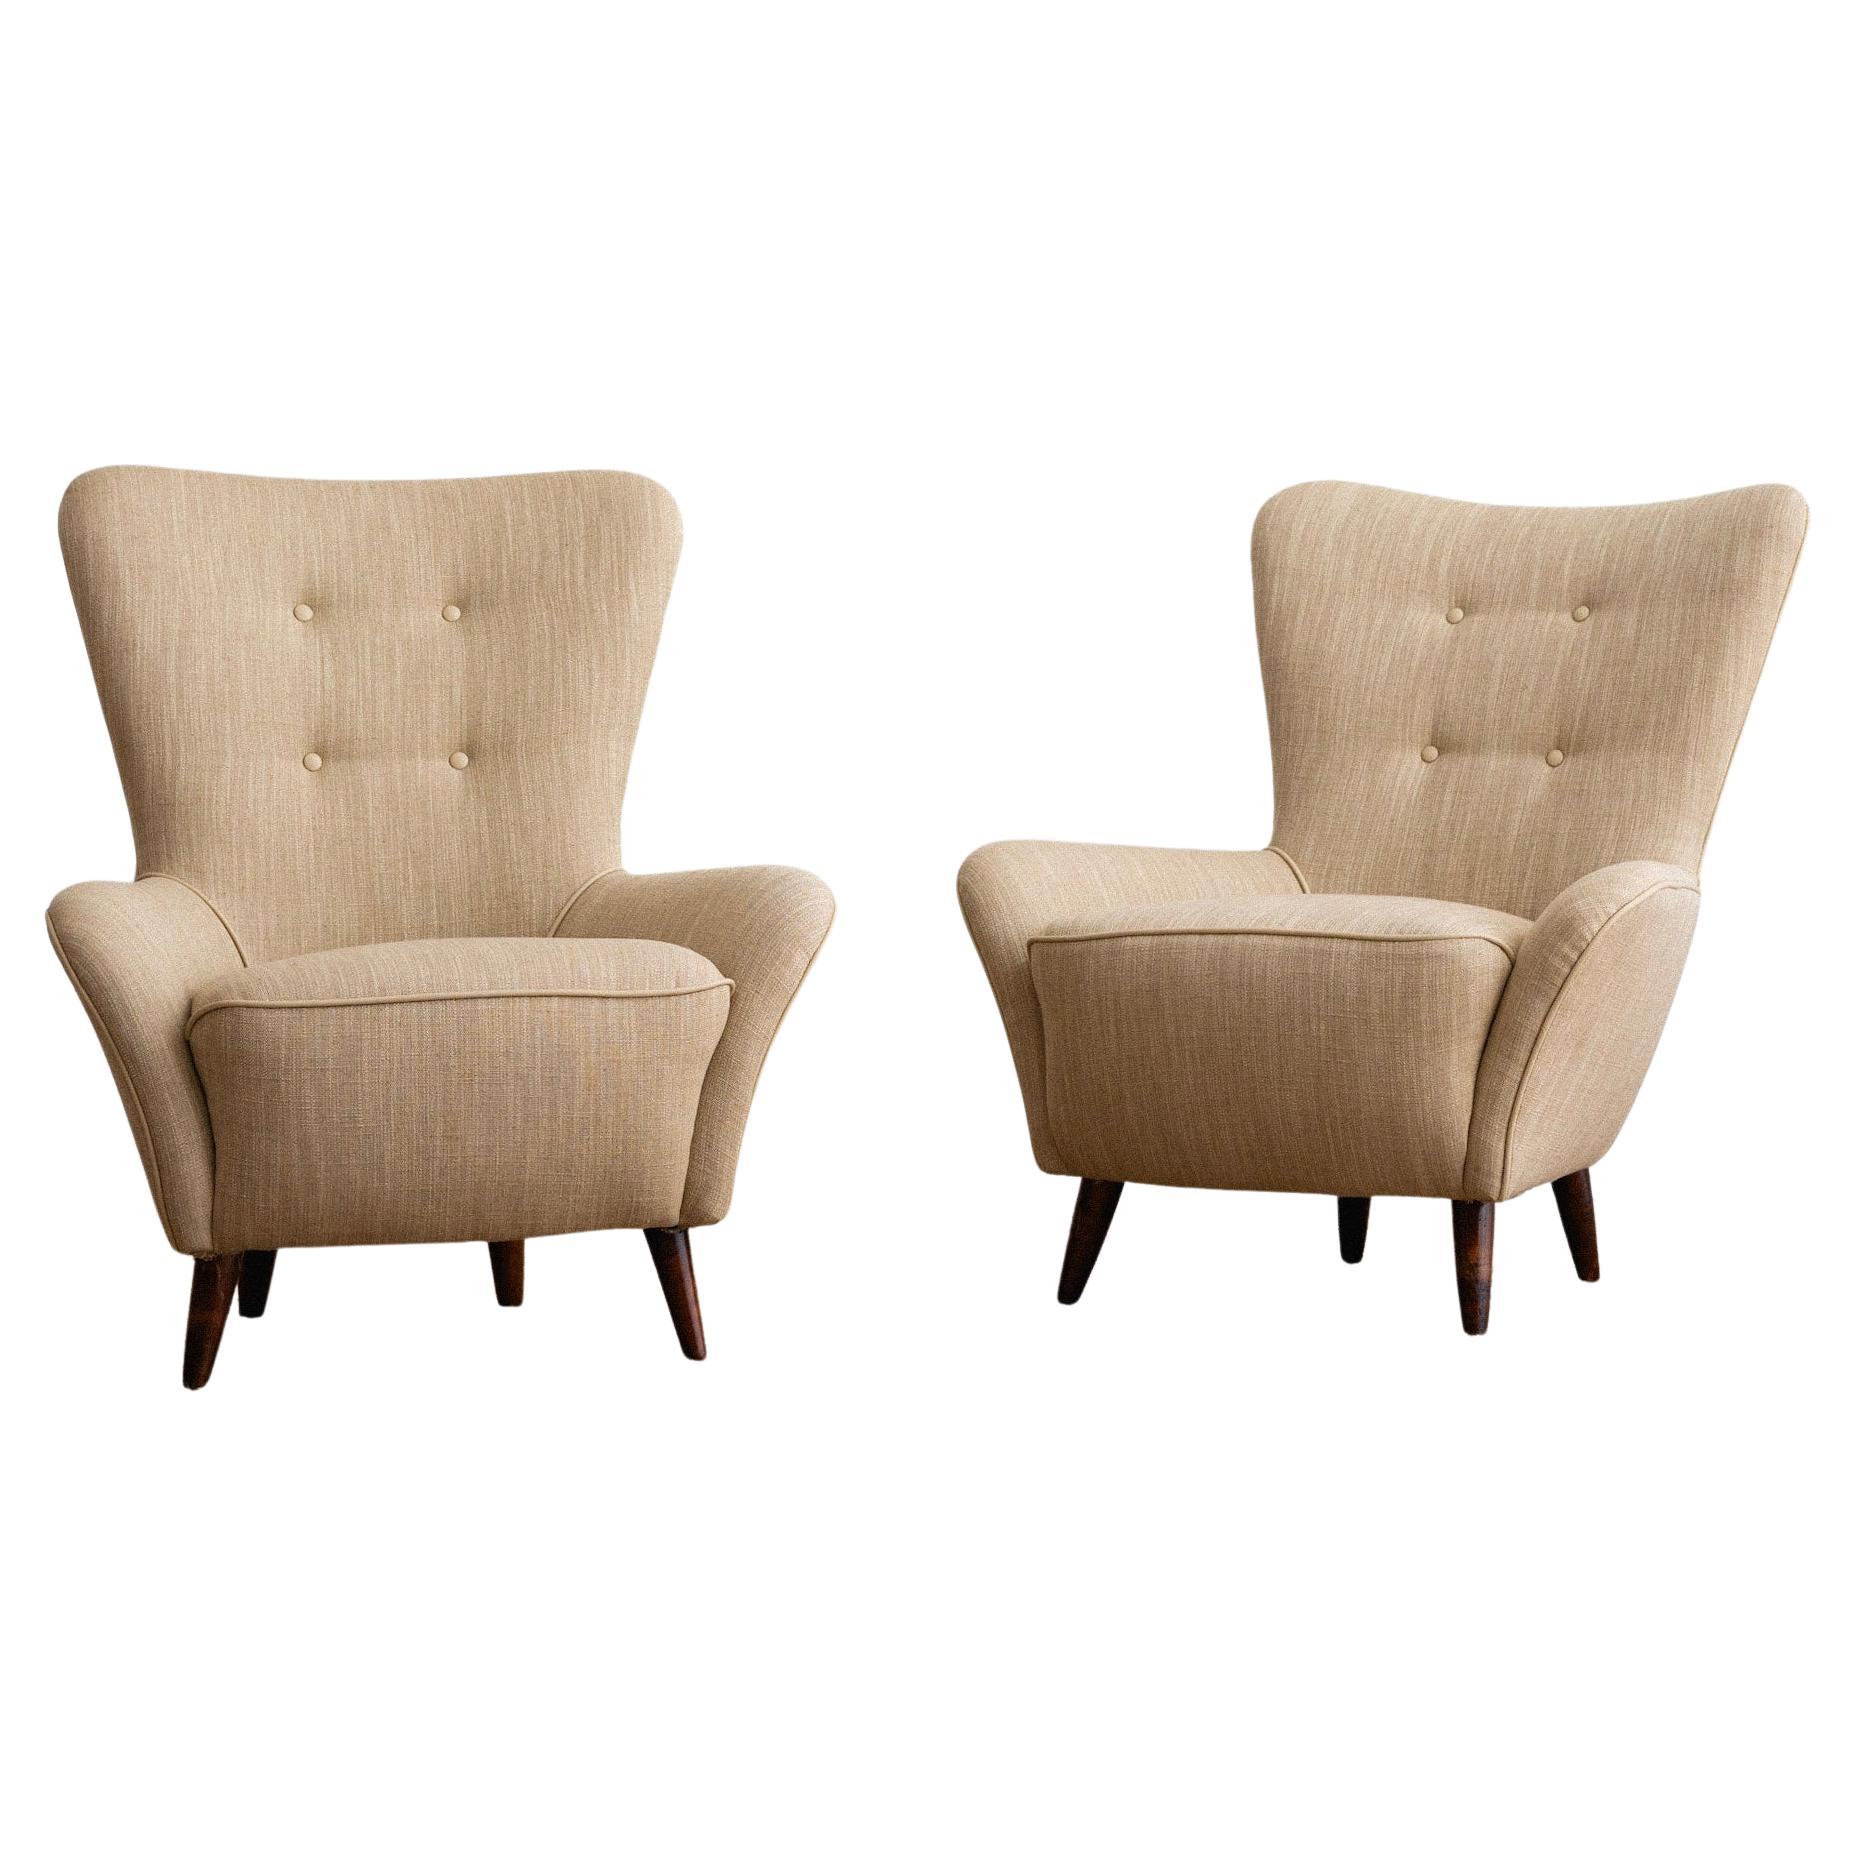 Petite Italian Armchairs in Linen and Leather - a Pair For Sale